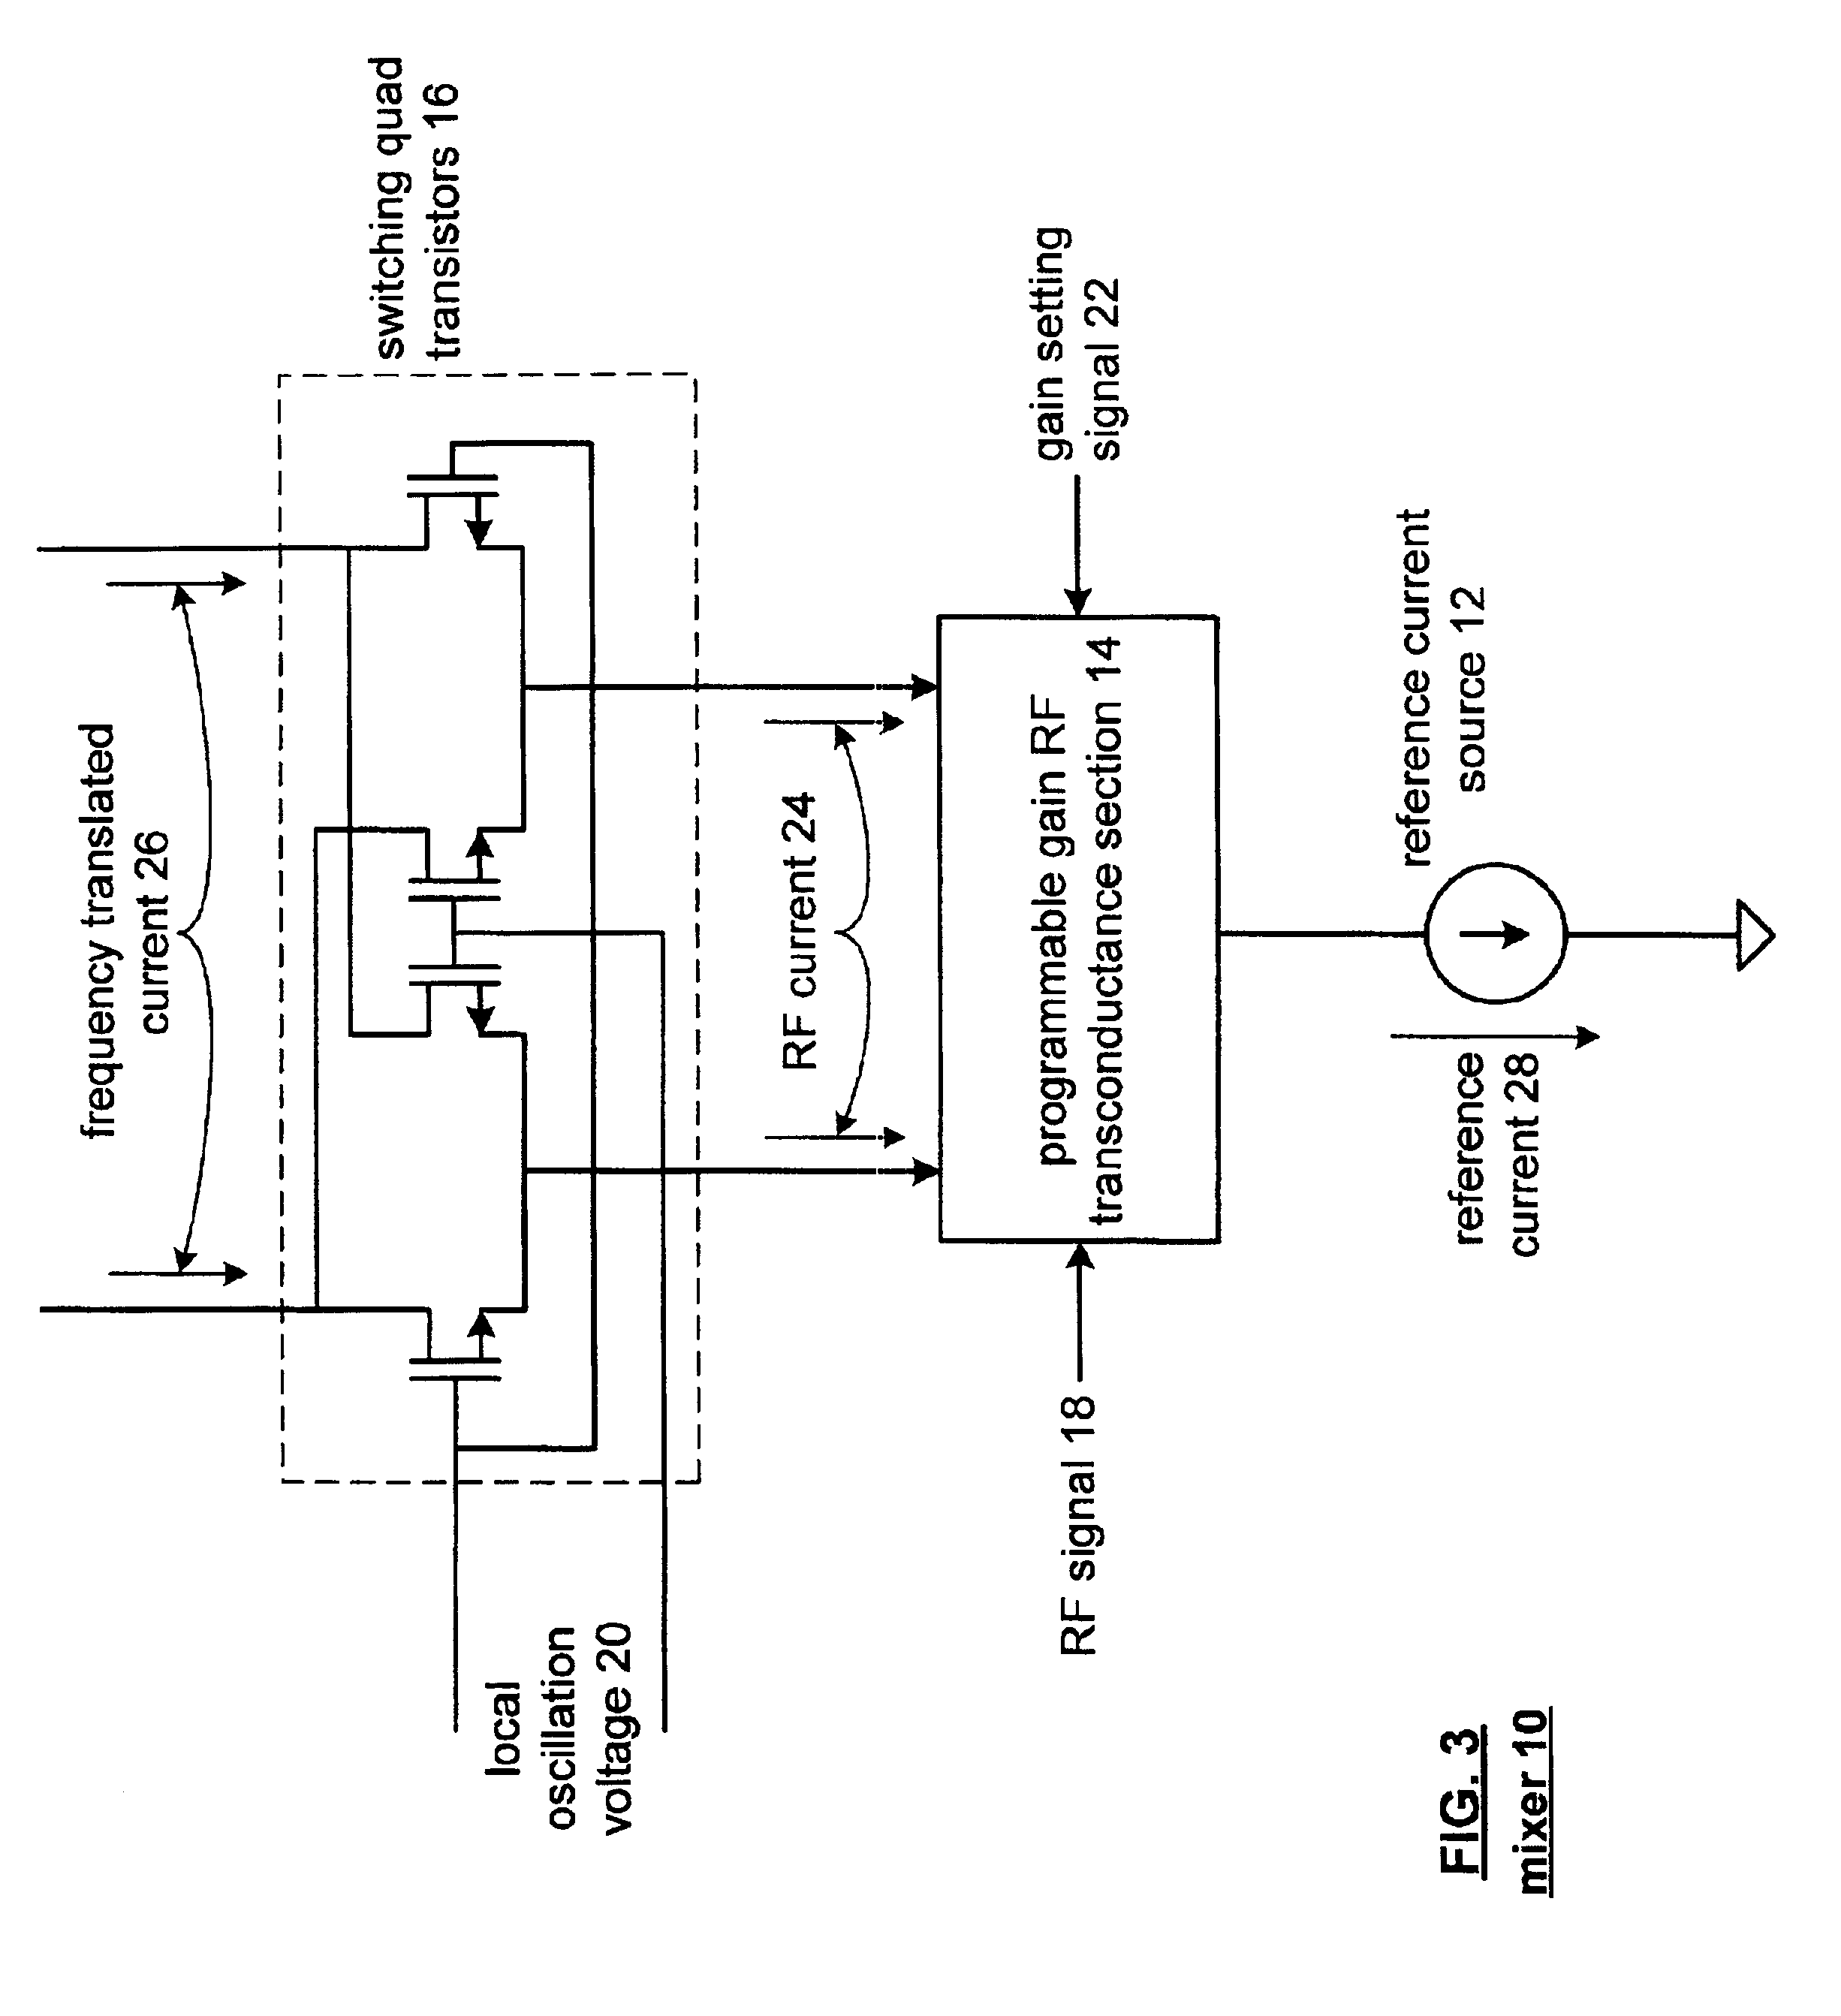 Mixer having low noise, controllable gain, and/or low supply voltage operation